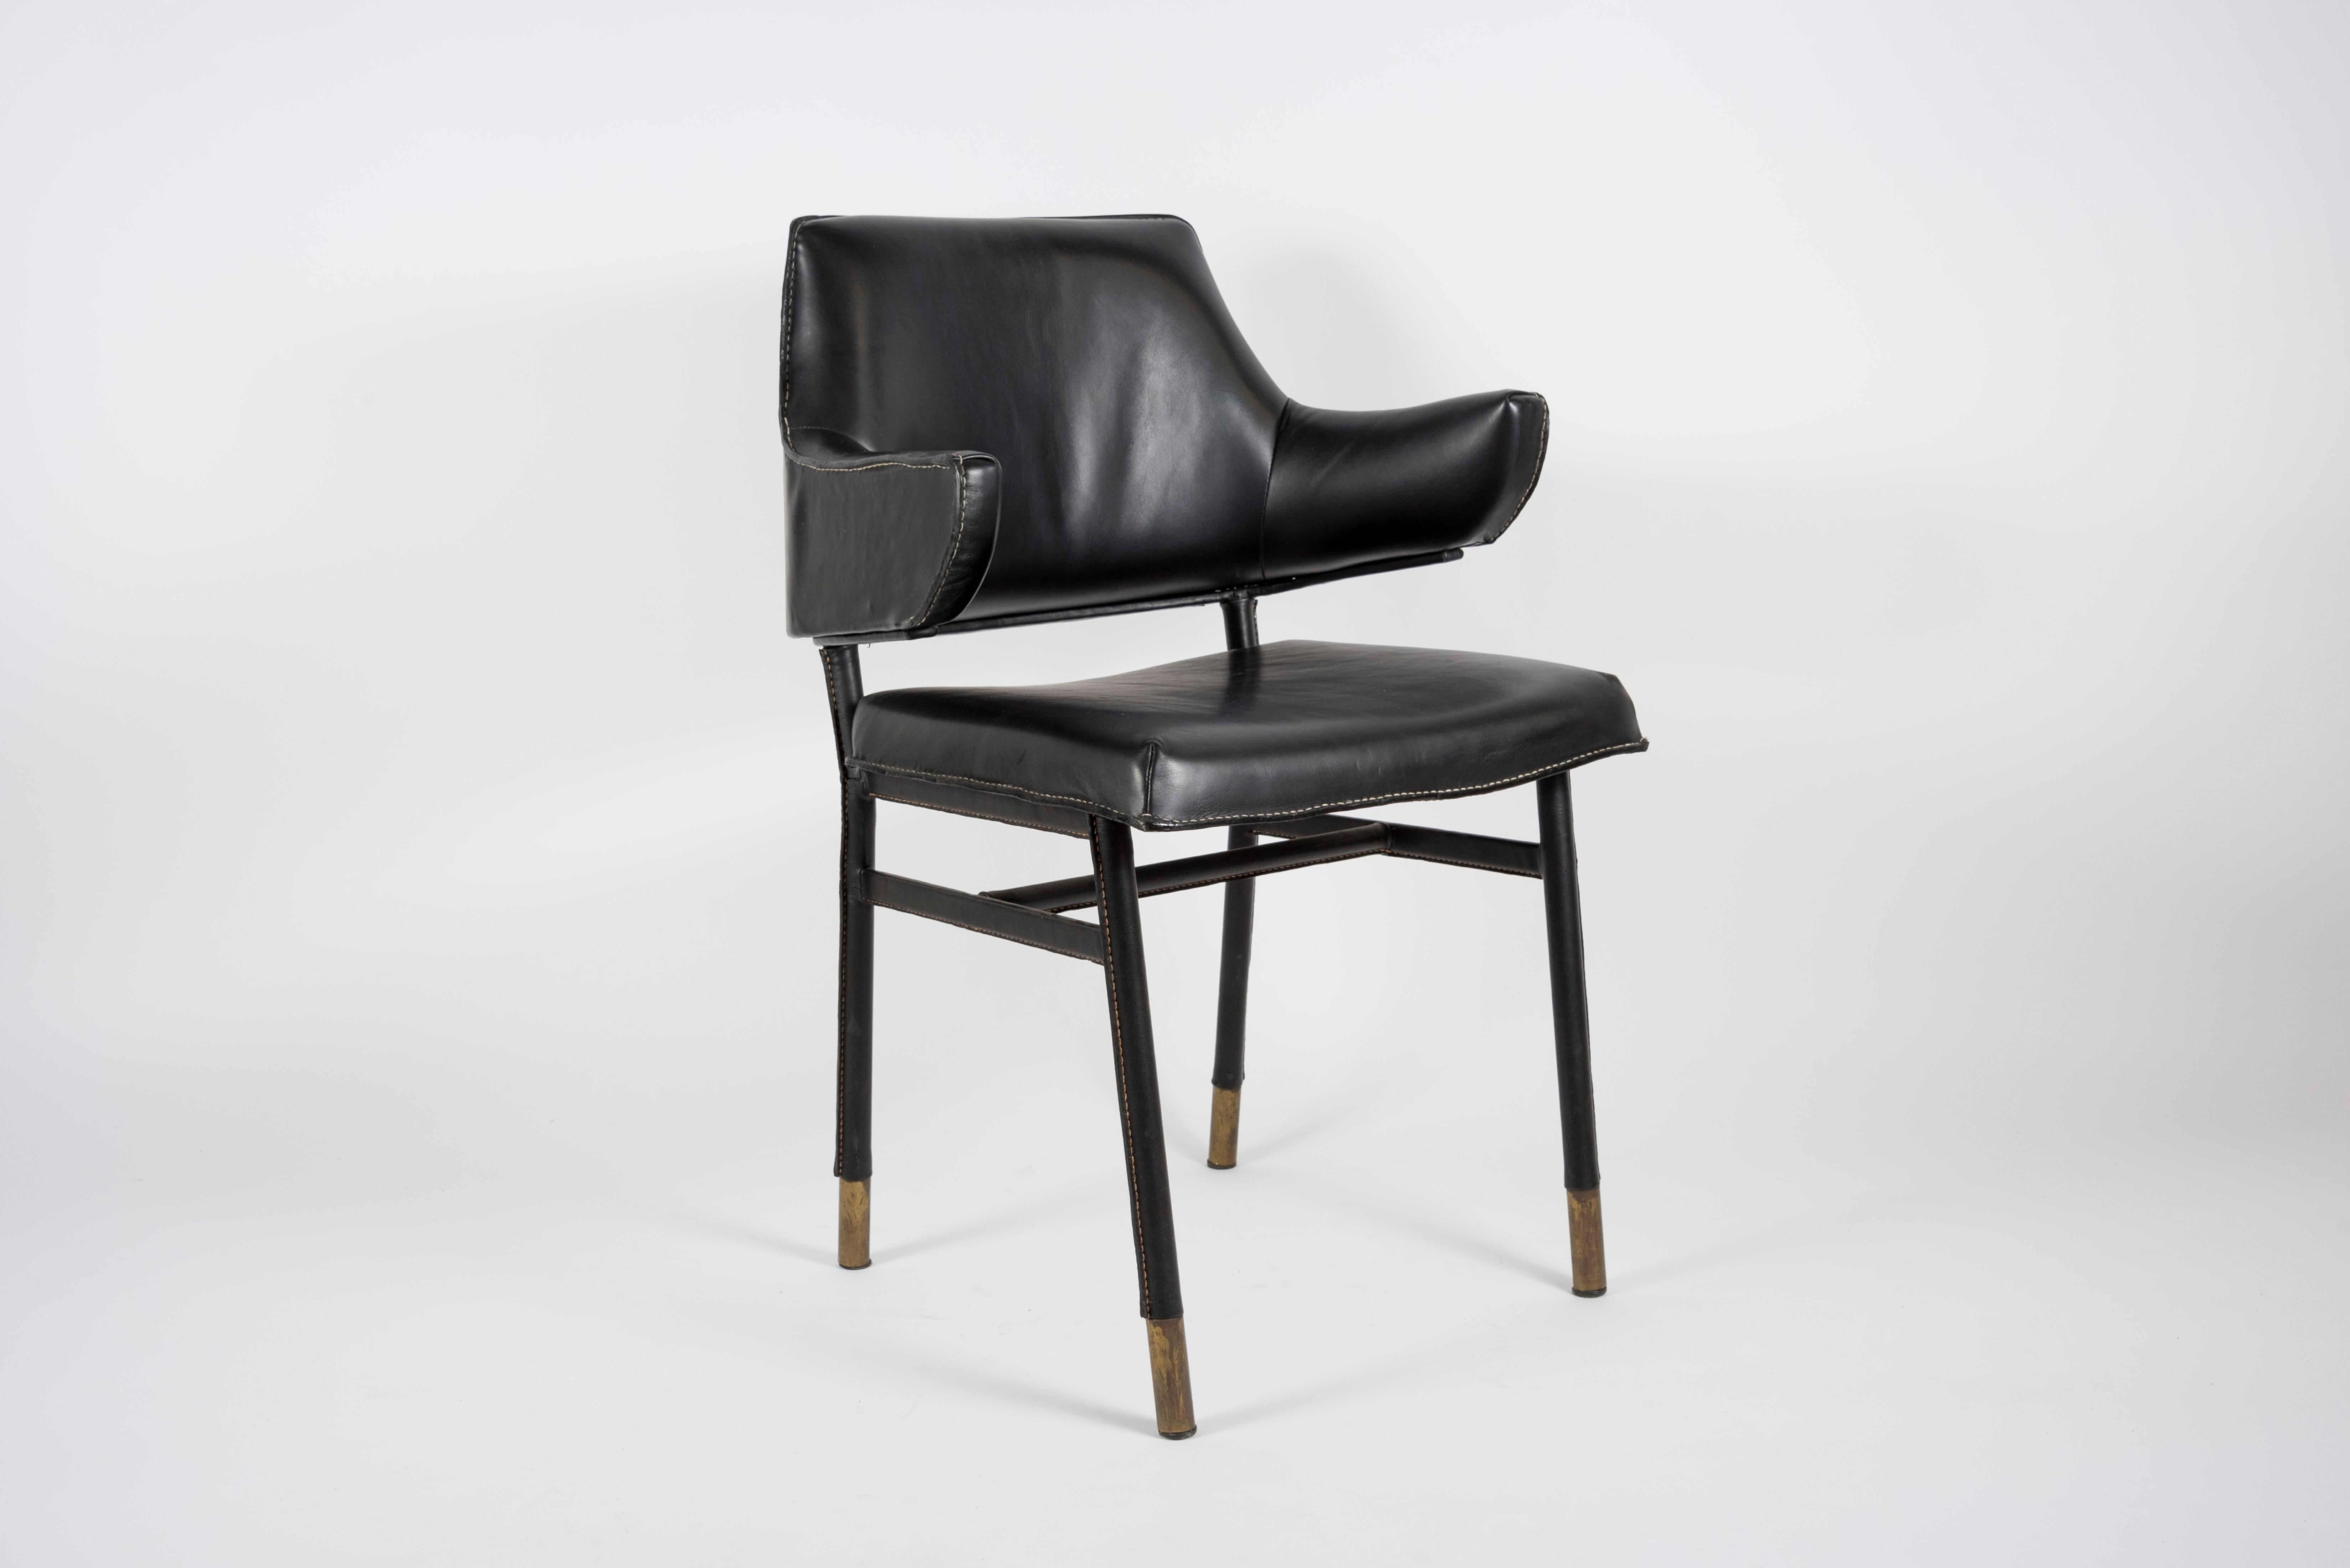 European 1950's Stitched Leather Armchair by Jacques Adnet For Sale